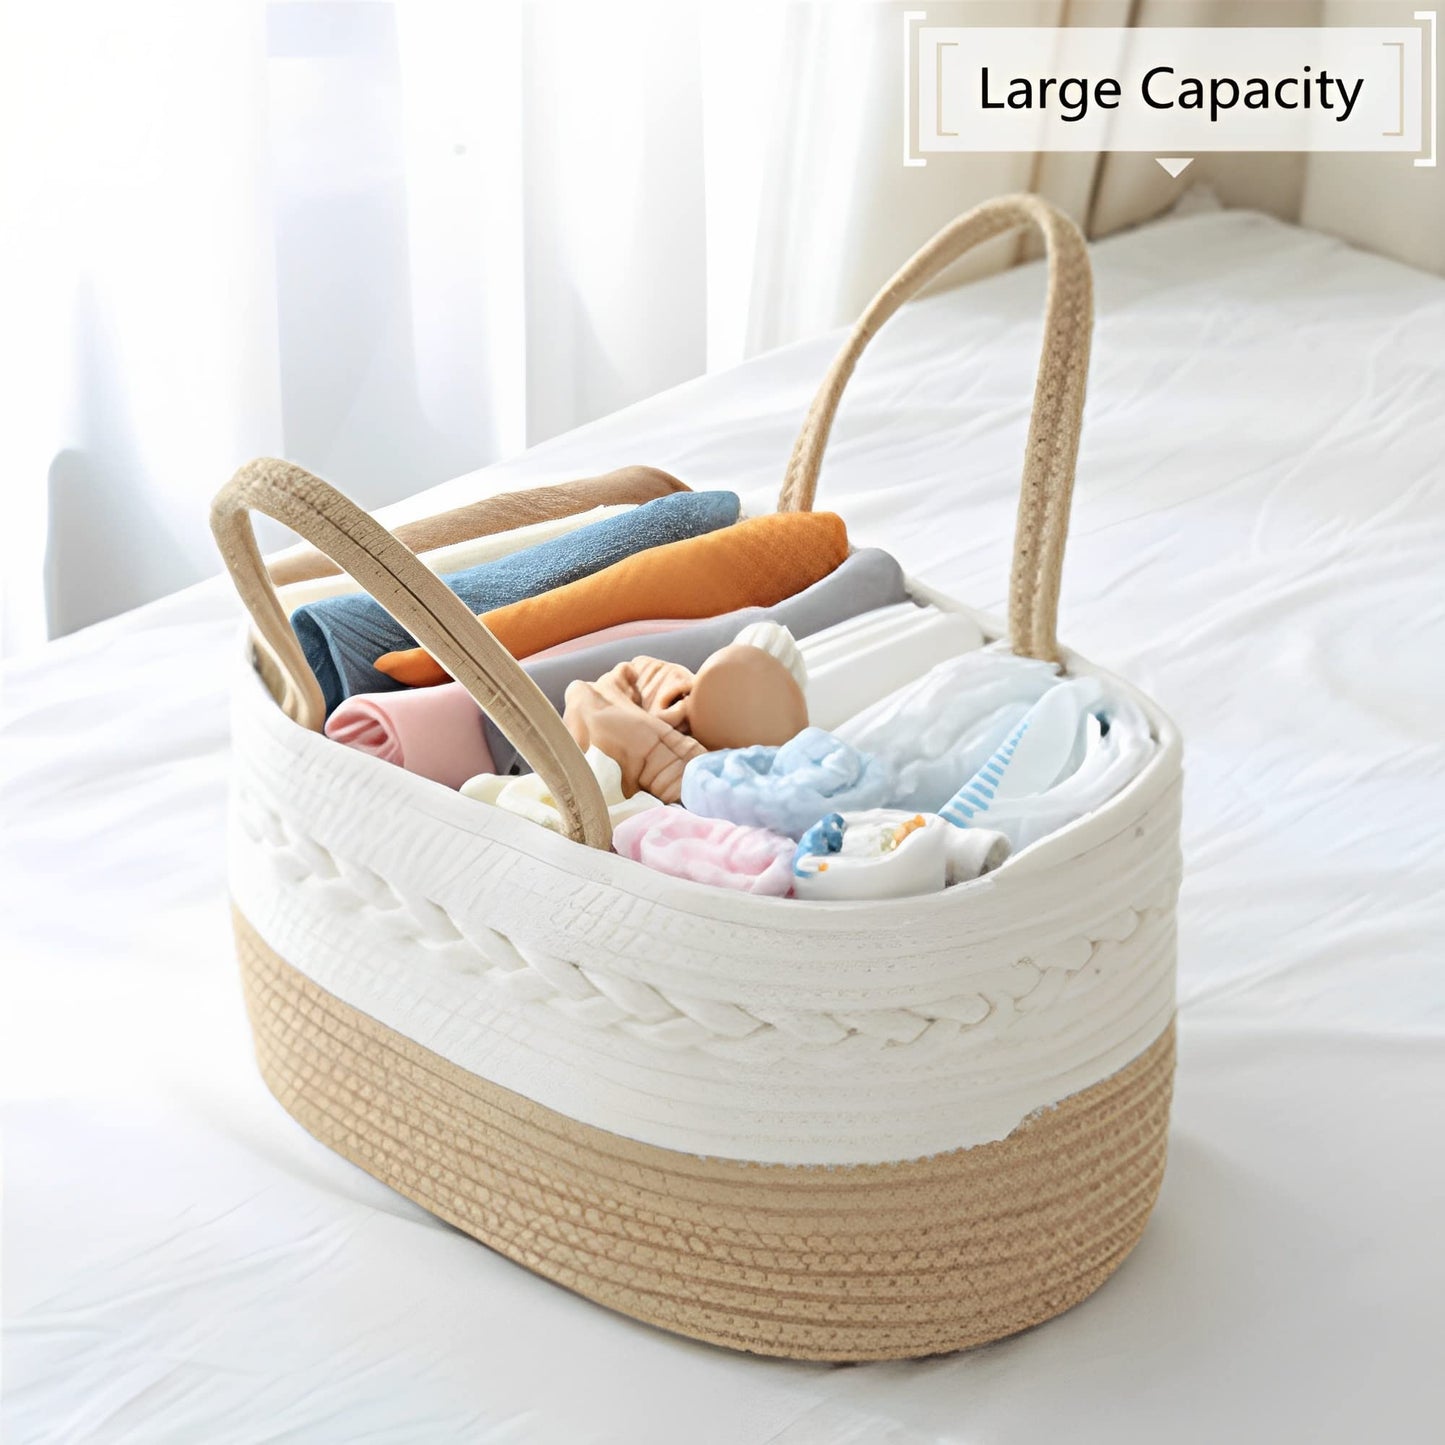 Beauenty Baby Diaper Caddy Organizer,Cotton Rope Diaper Storage Basket with Adjustable Divider,Portable Car Travel Diapers Organizer for Newborn Boys Girls,Large Capacity Baby Baskets for Storage